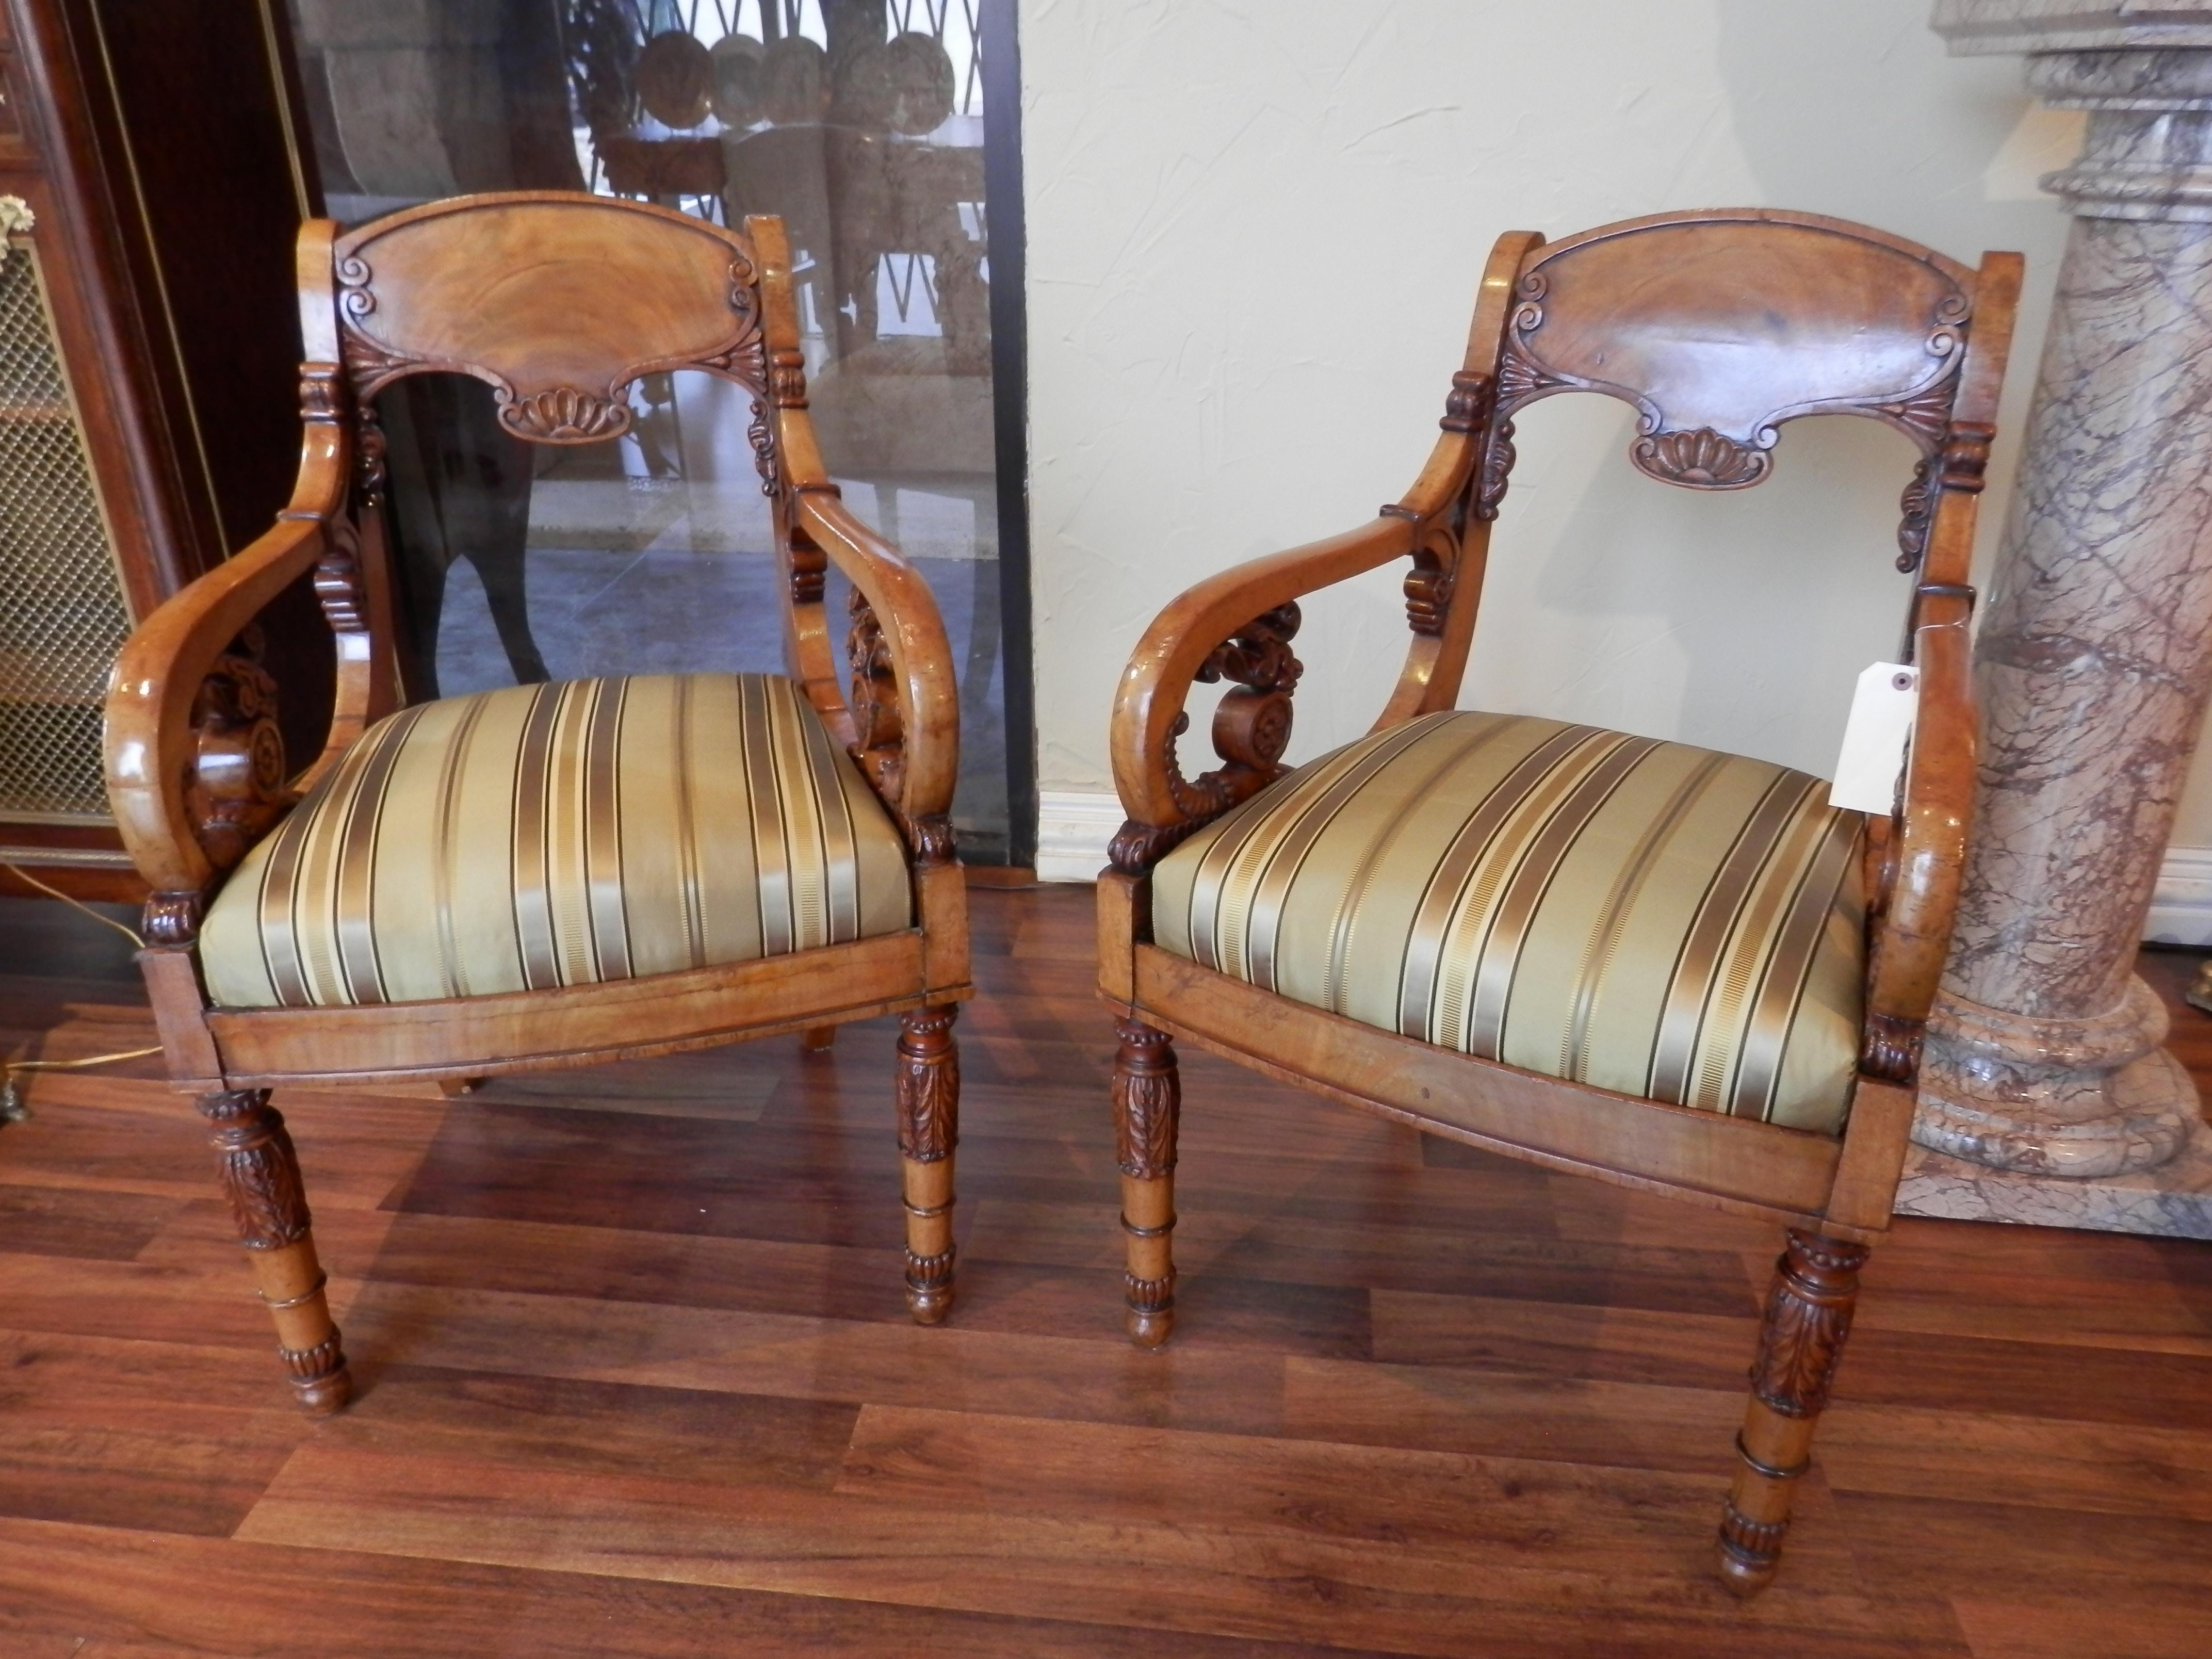 Hand-Carved Pair of Rare Early 19th Century Baltic Neoclassical Chairs For Sale